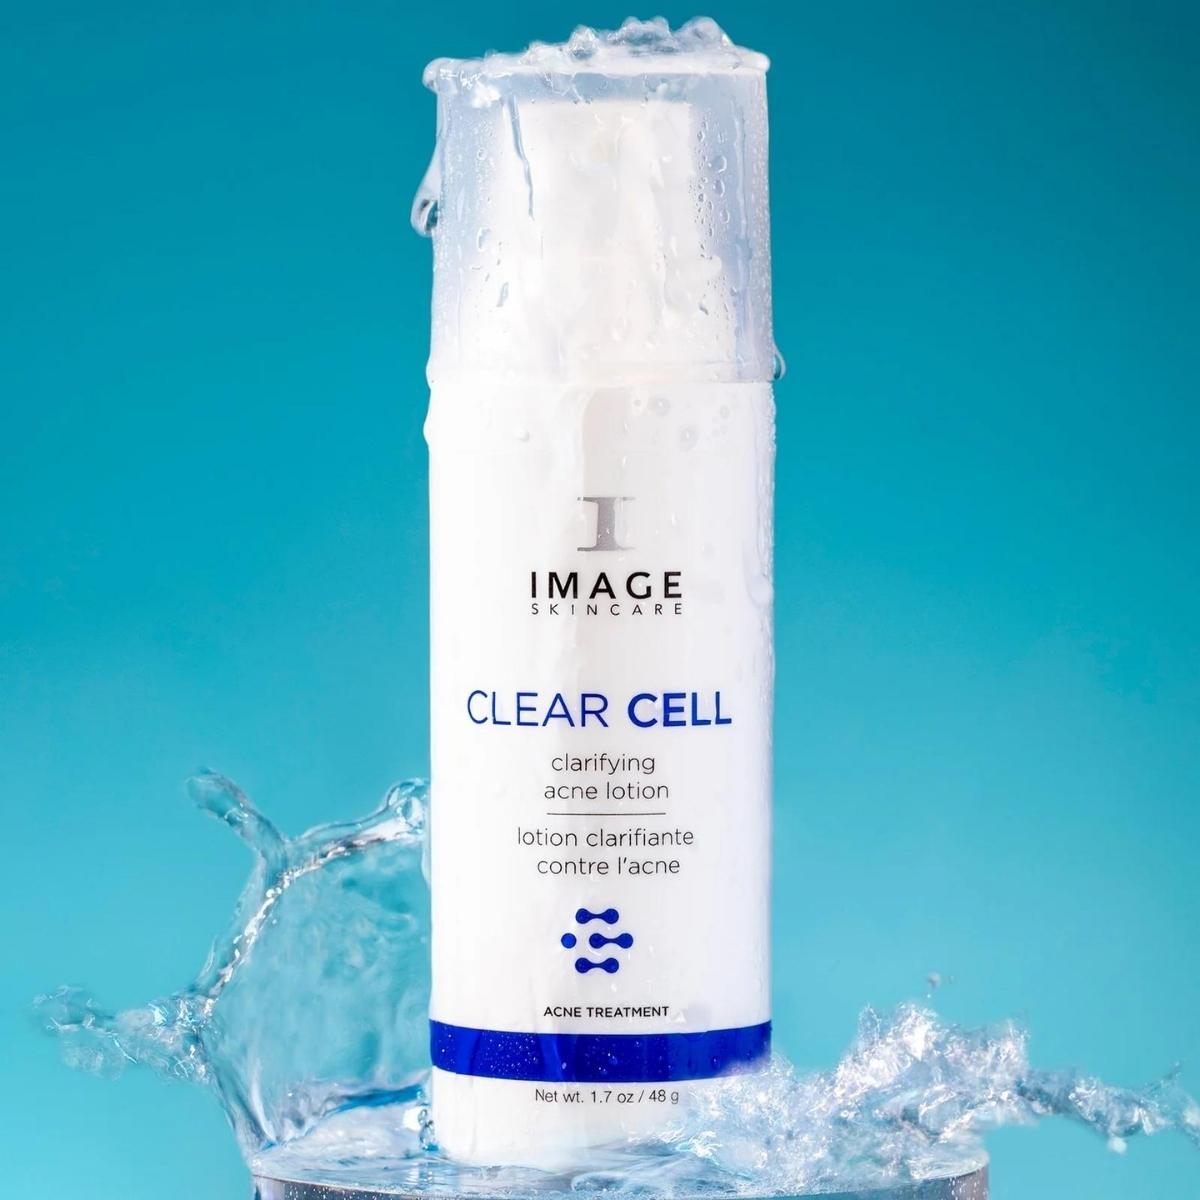 IMAGE Skincare Clear Cell Clarifying Acne Lotion product with water splashing 